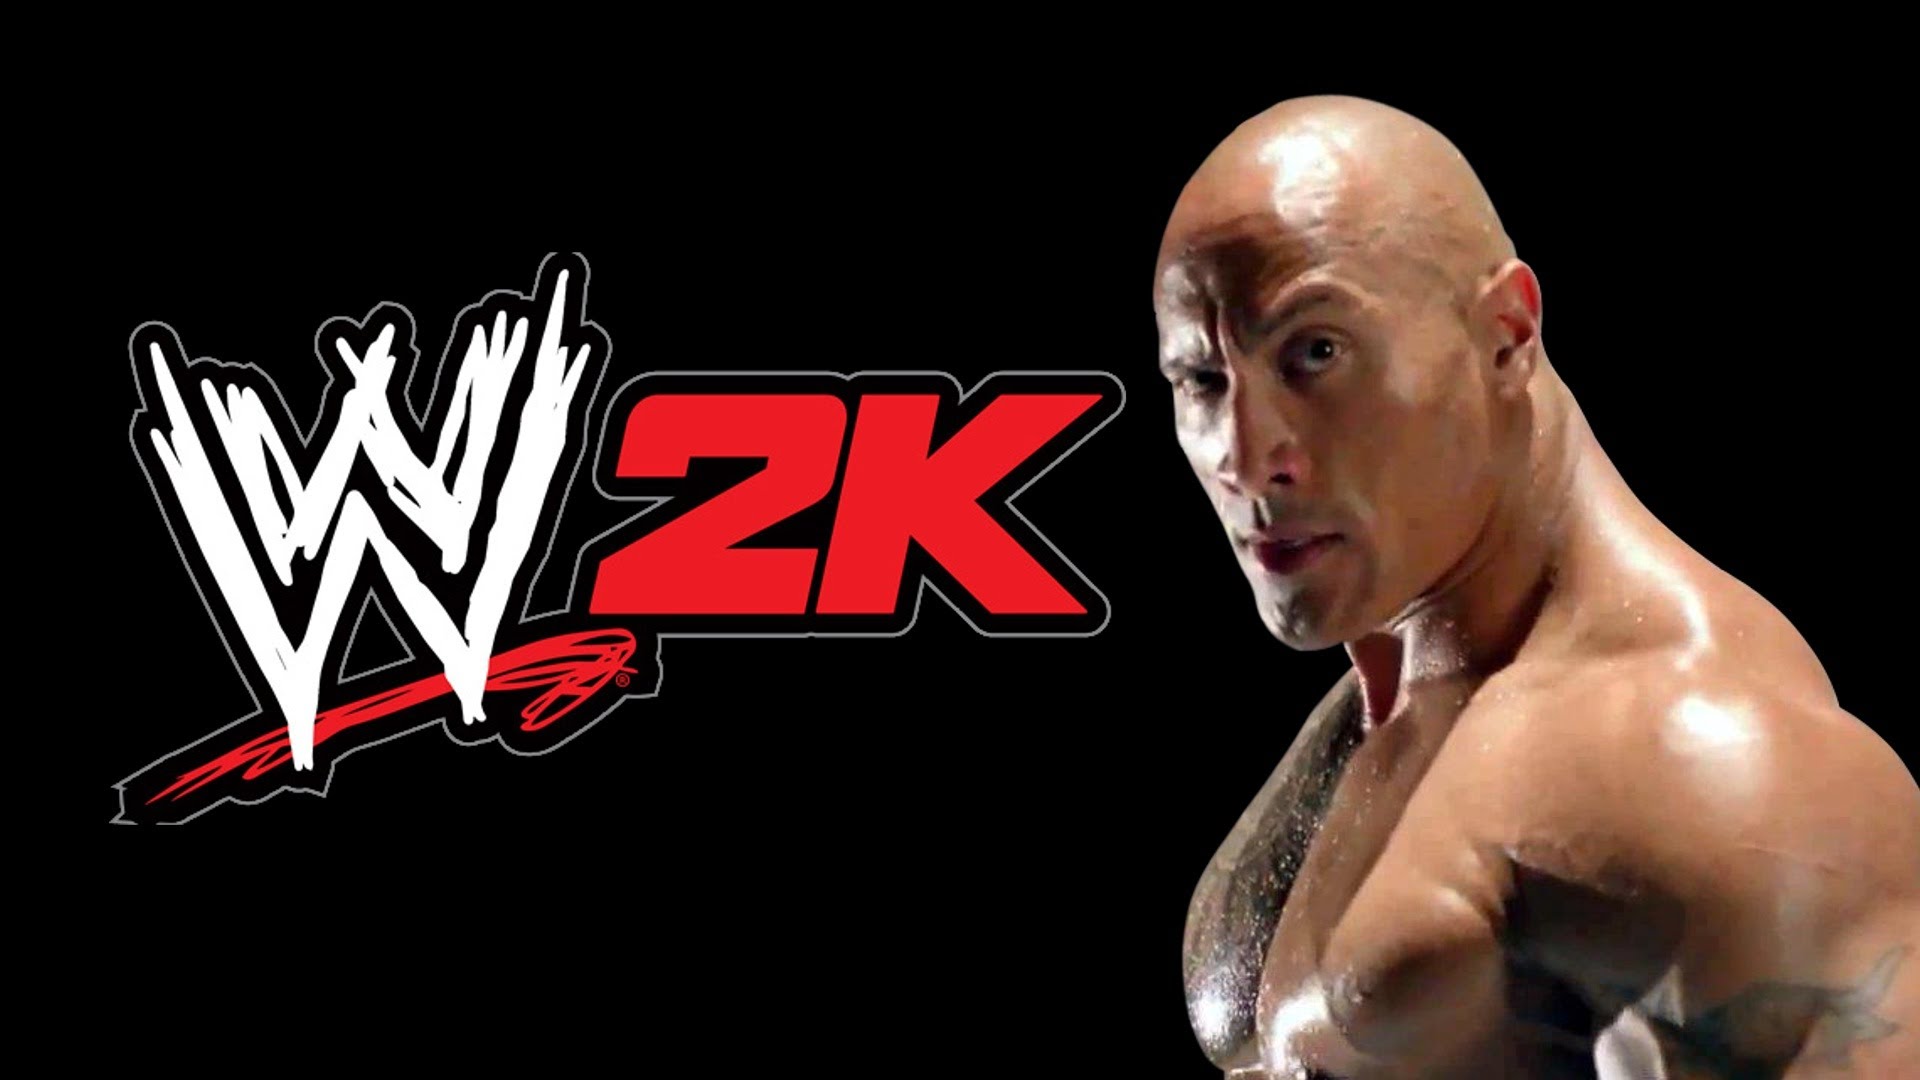 Wwe the rock hd wallpaper wallpapers55.com - Best Wallpapers for